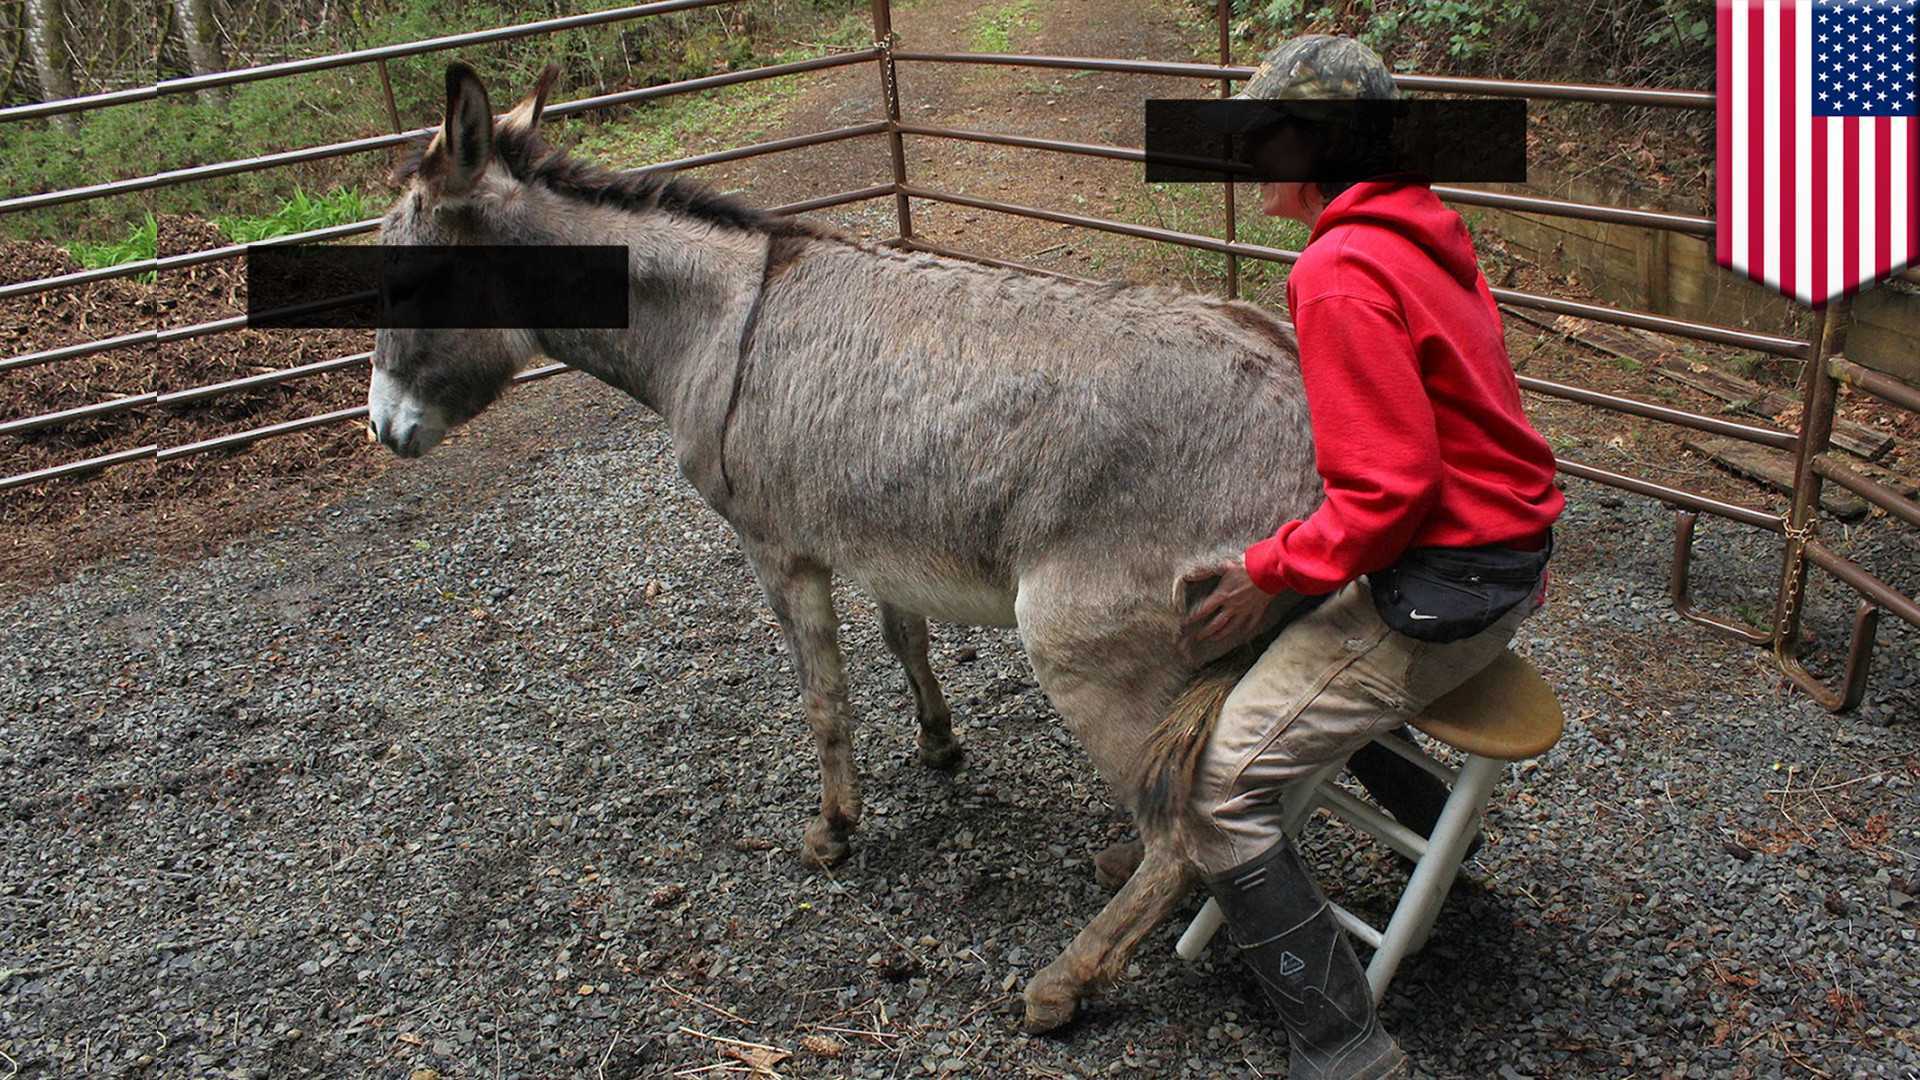 Men having sex with donkey picture pic